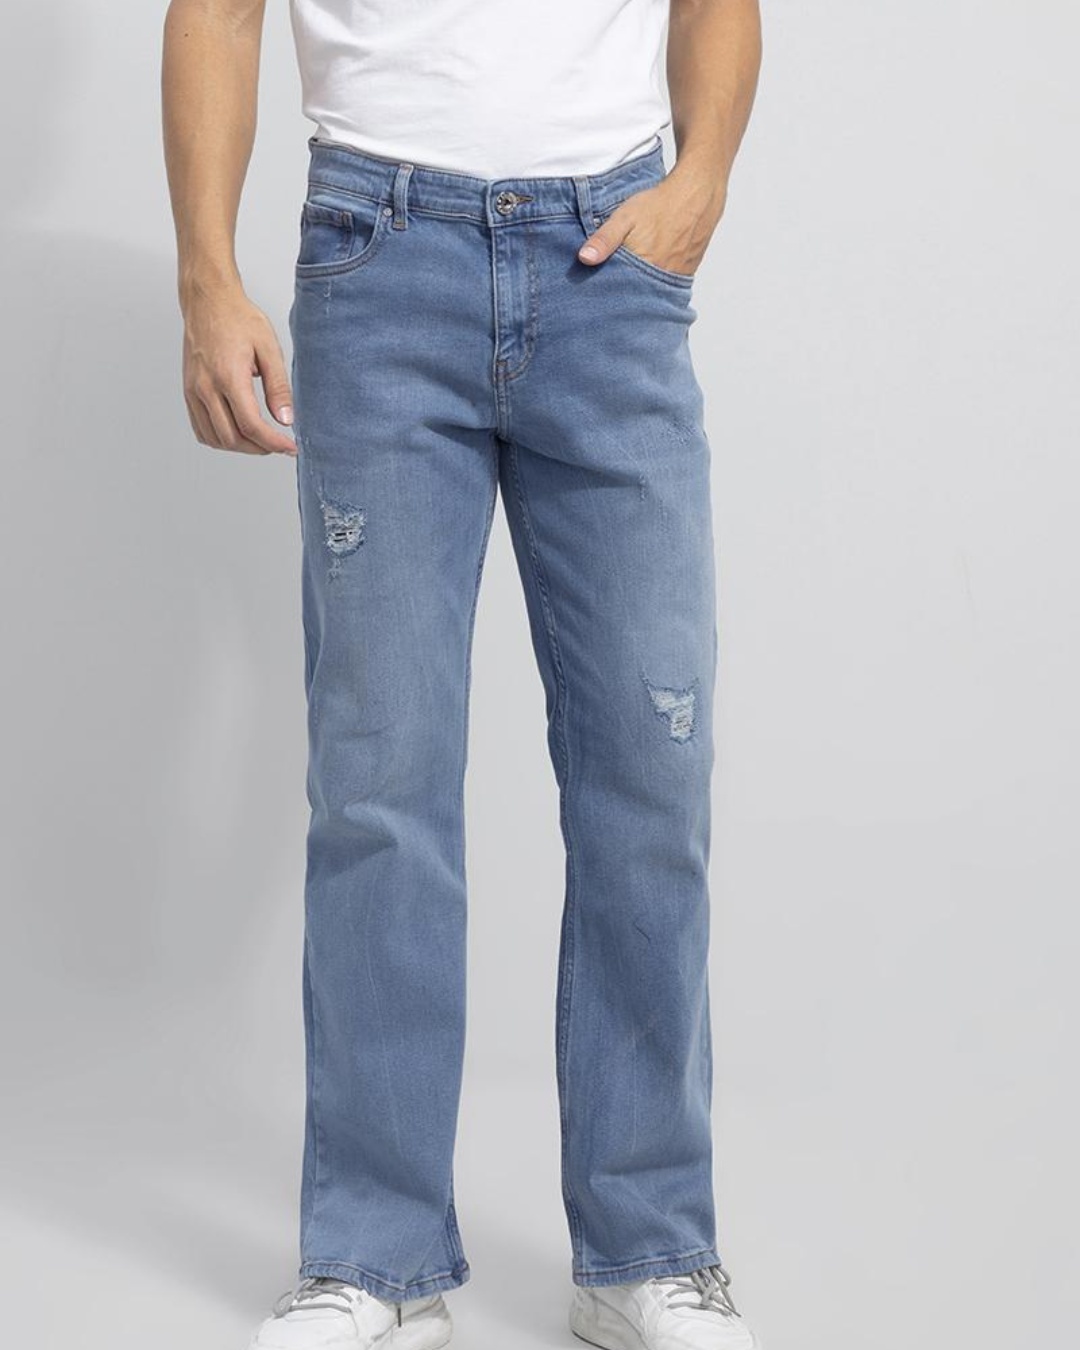 Buy Men's Blue Washed Ripped Bootcut Jeans Online at Bewakoof